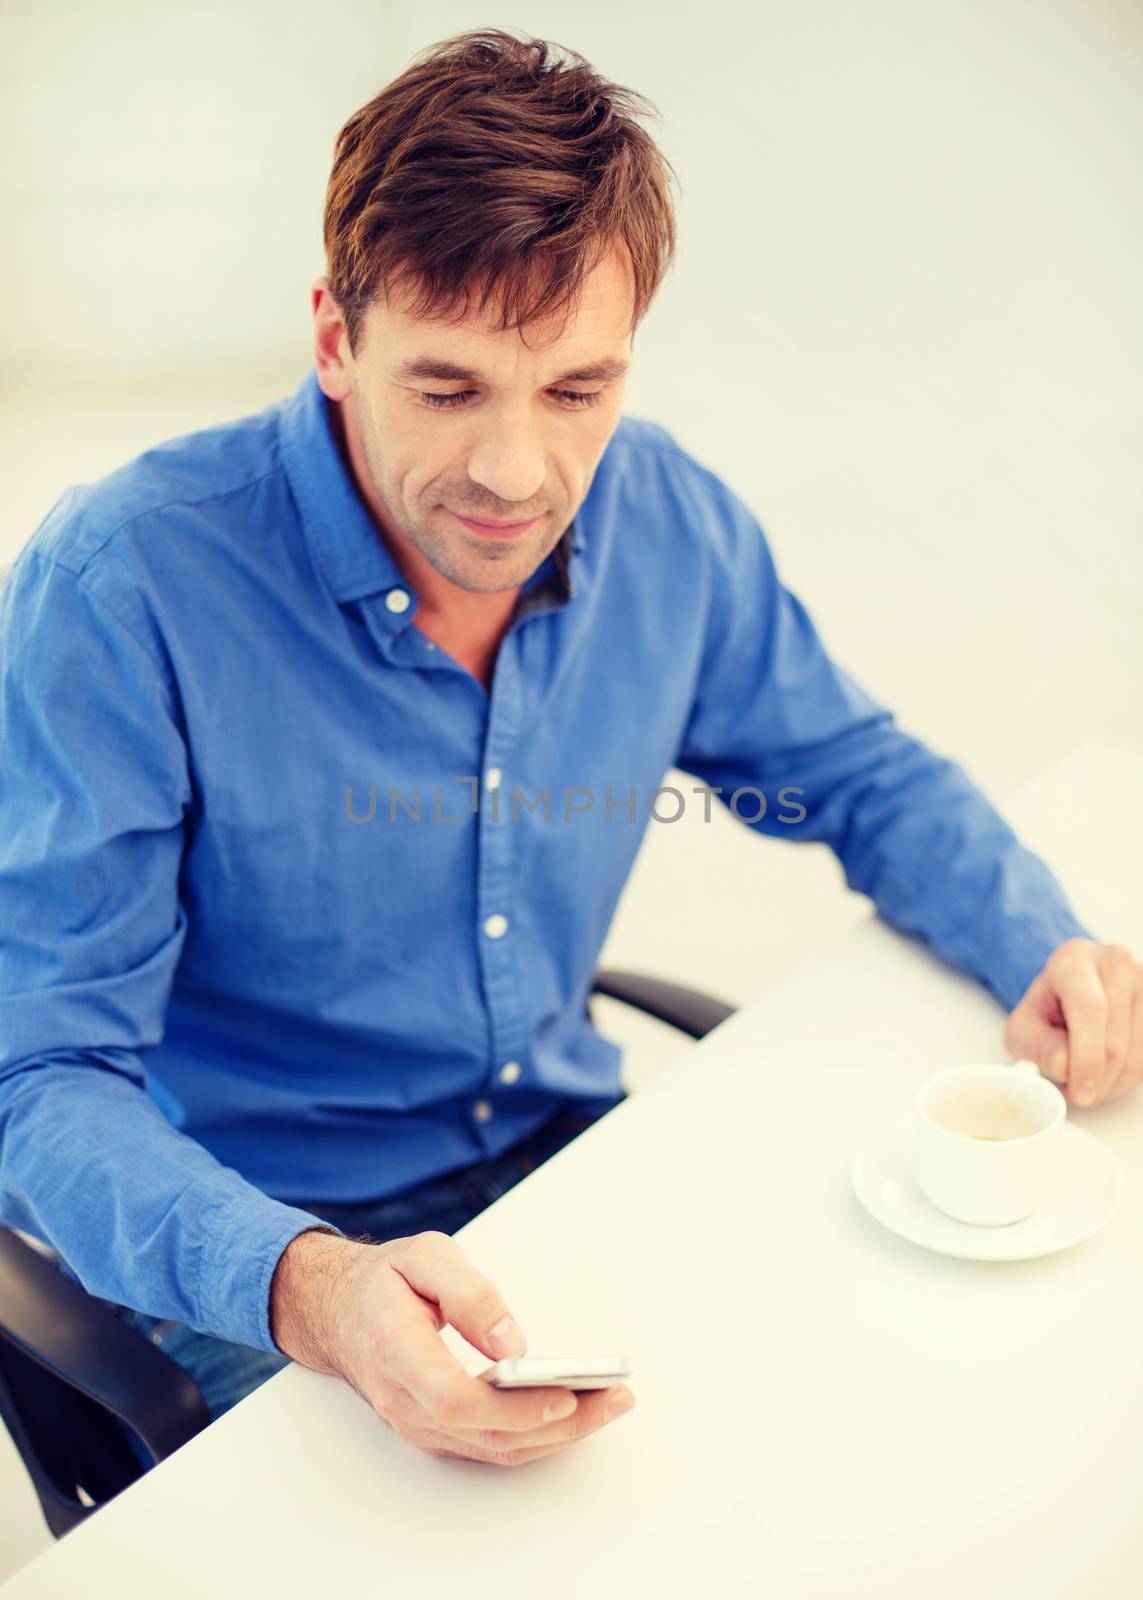 business, communication, modern technology concept - buisnessman with smartphone and cup of coffee